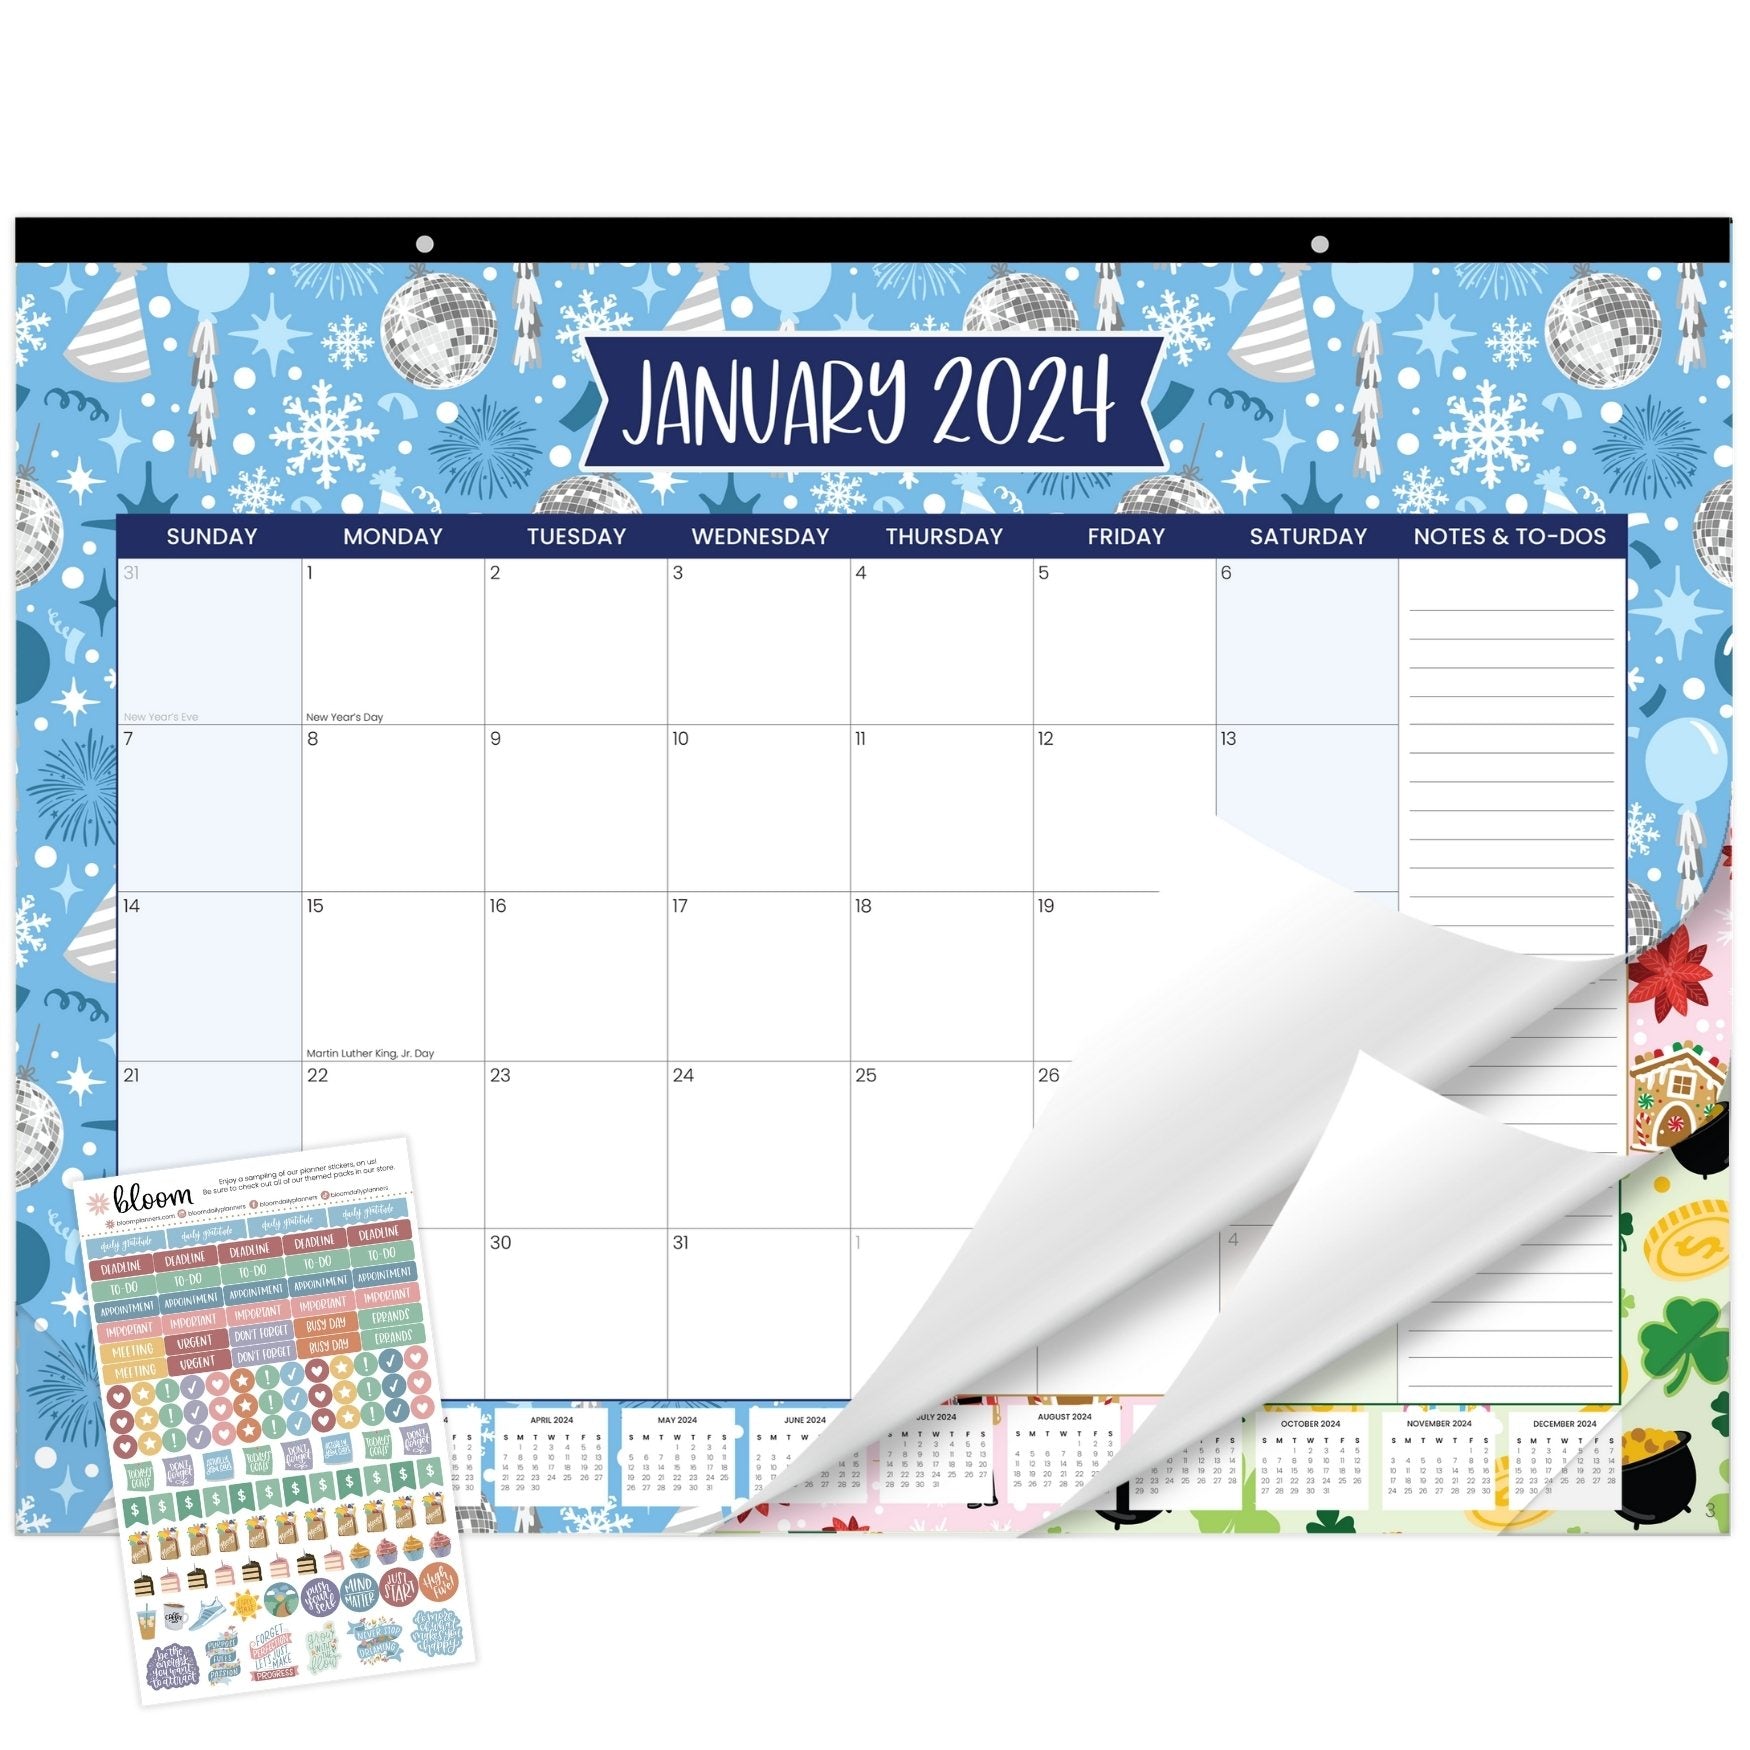 Boxclever Press Family Weekly Planner 2024 Calendar. 12 Month Wall